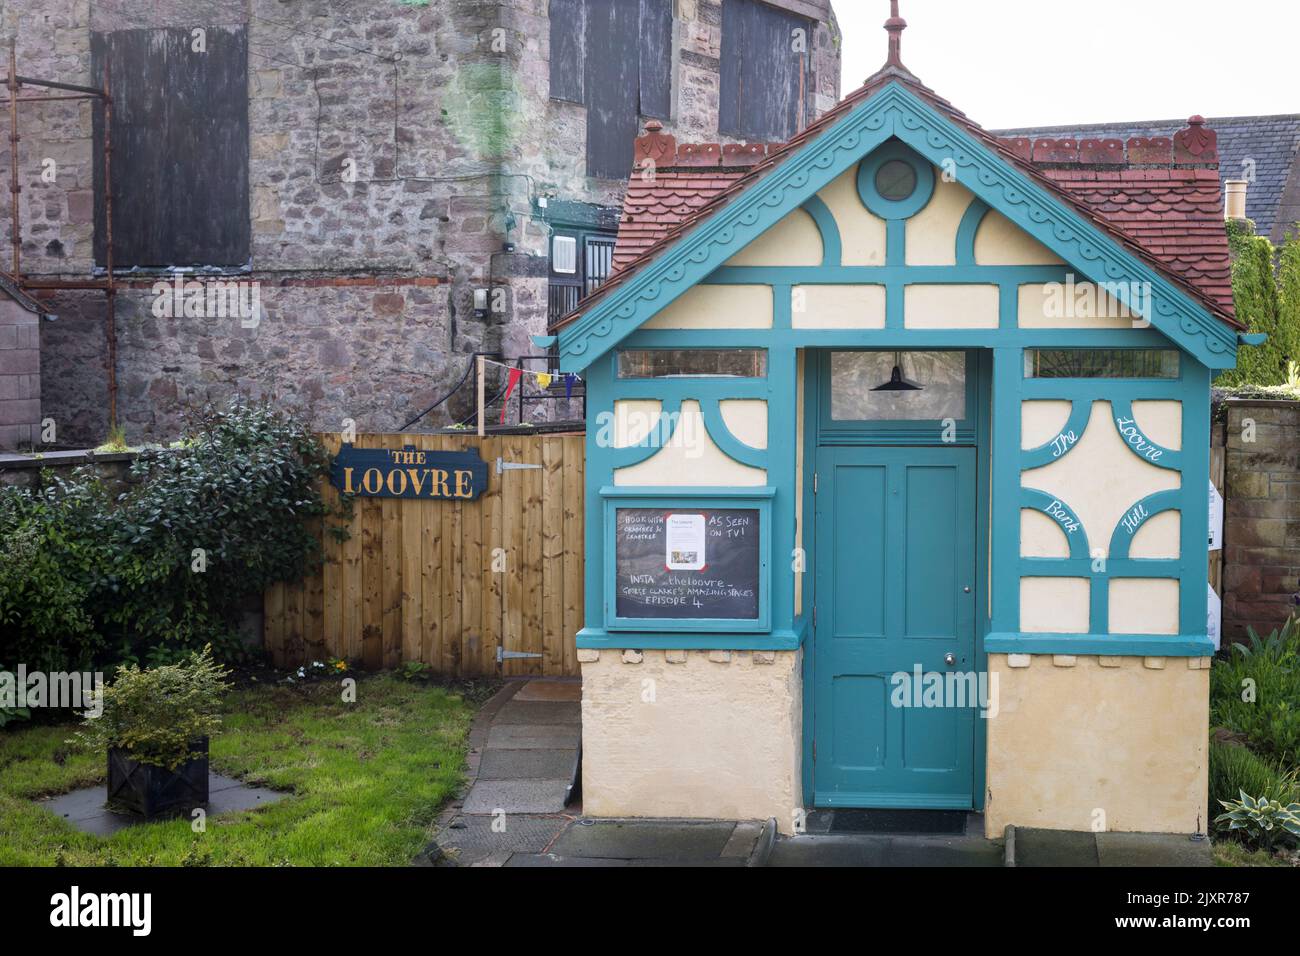 Converted public toilet 'The Louvre' as featured on TV, Berwick-upon-Tweed, England. Stock Photo